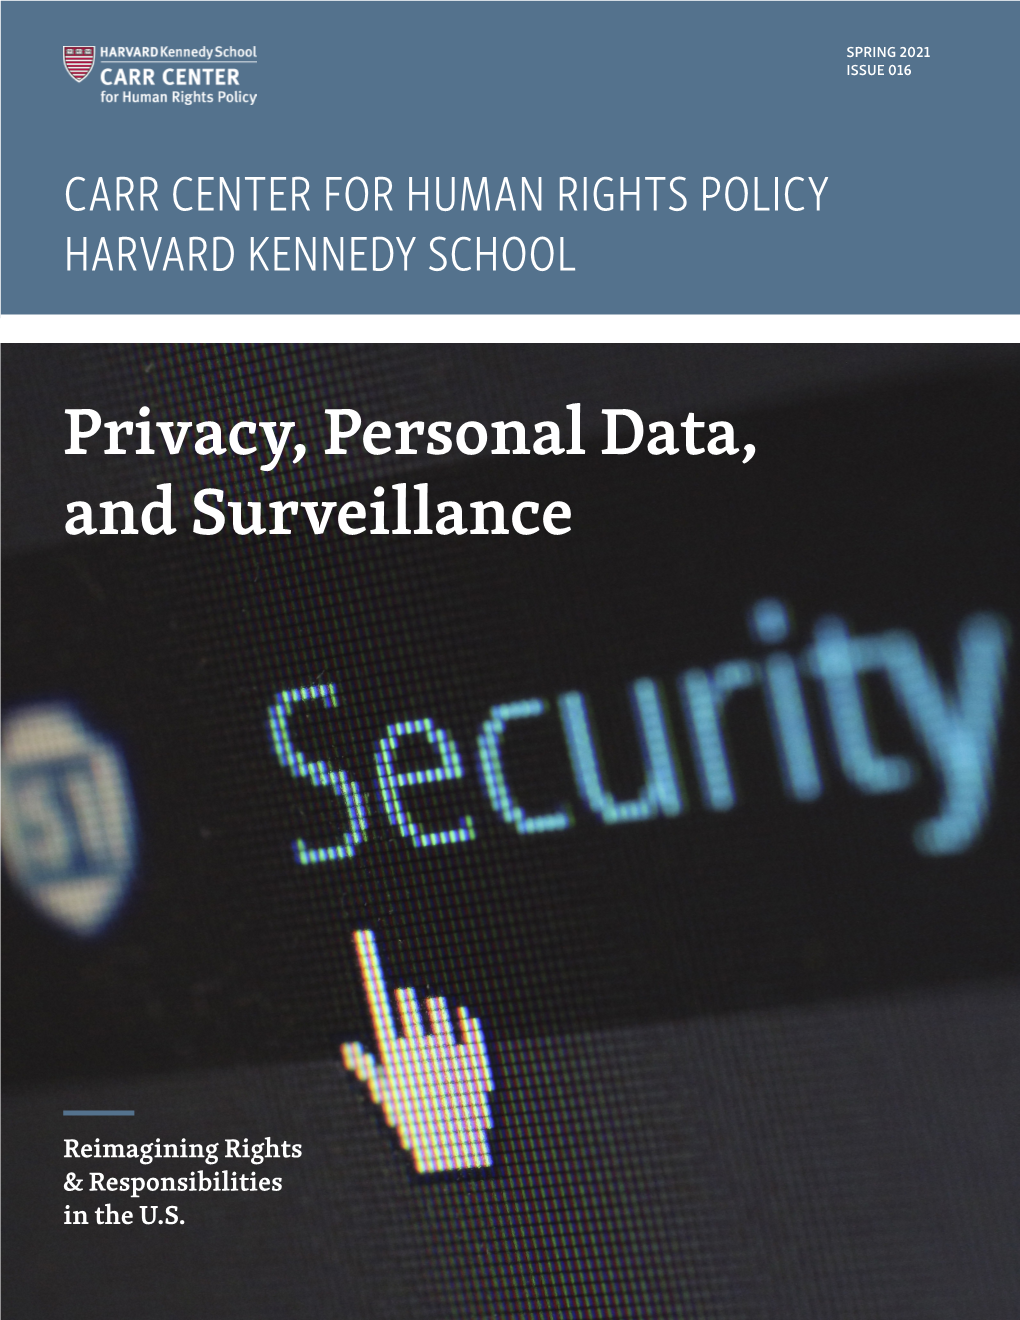 Privacy, Personal Data, and Surveillance